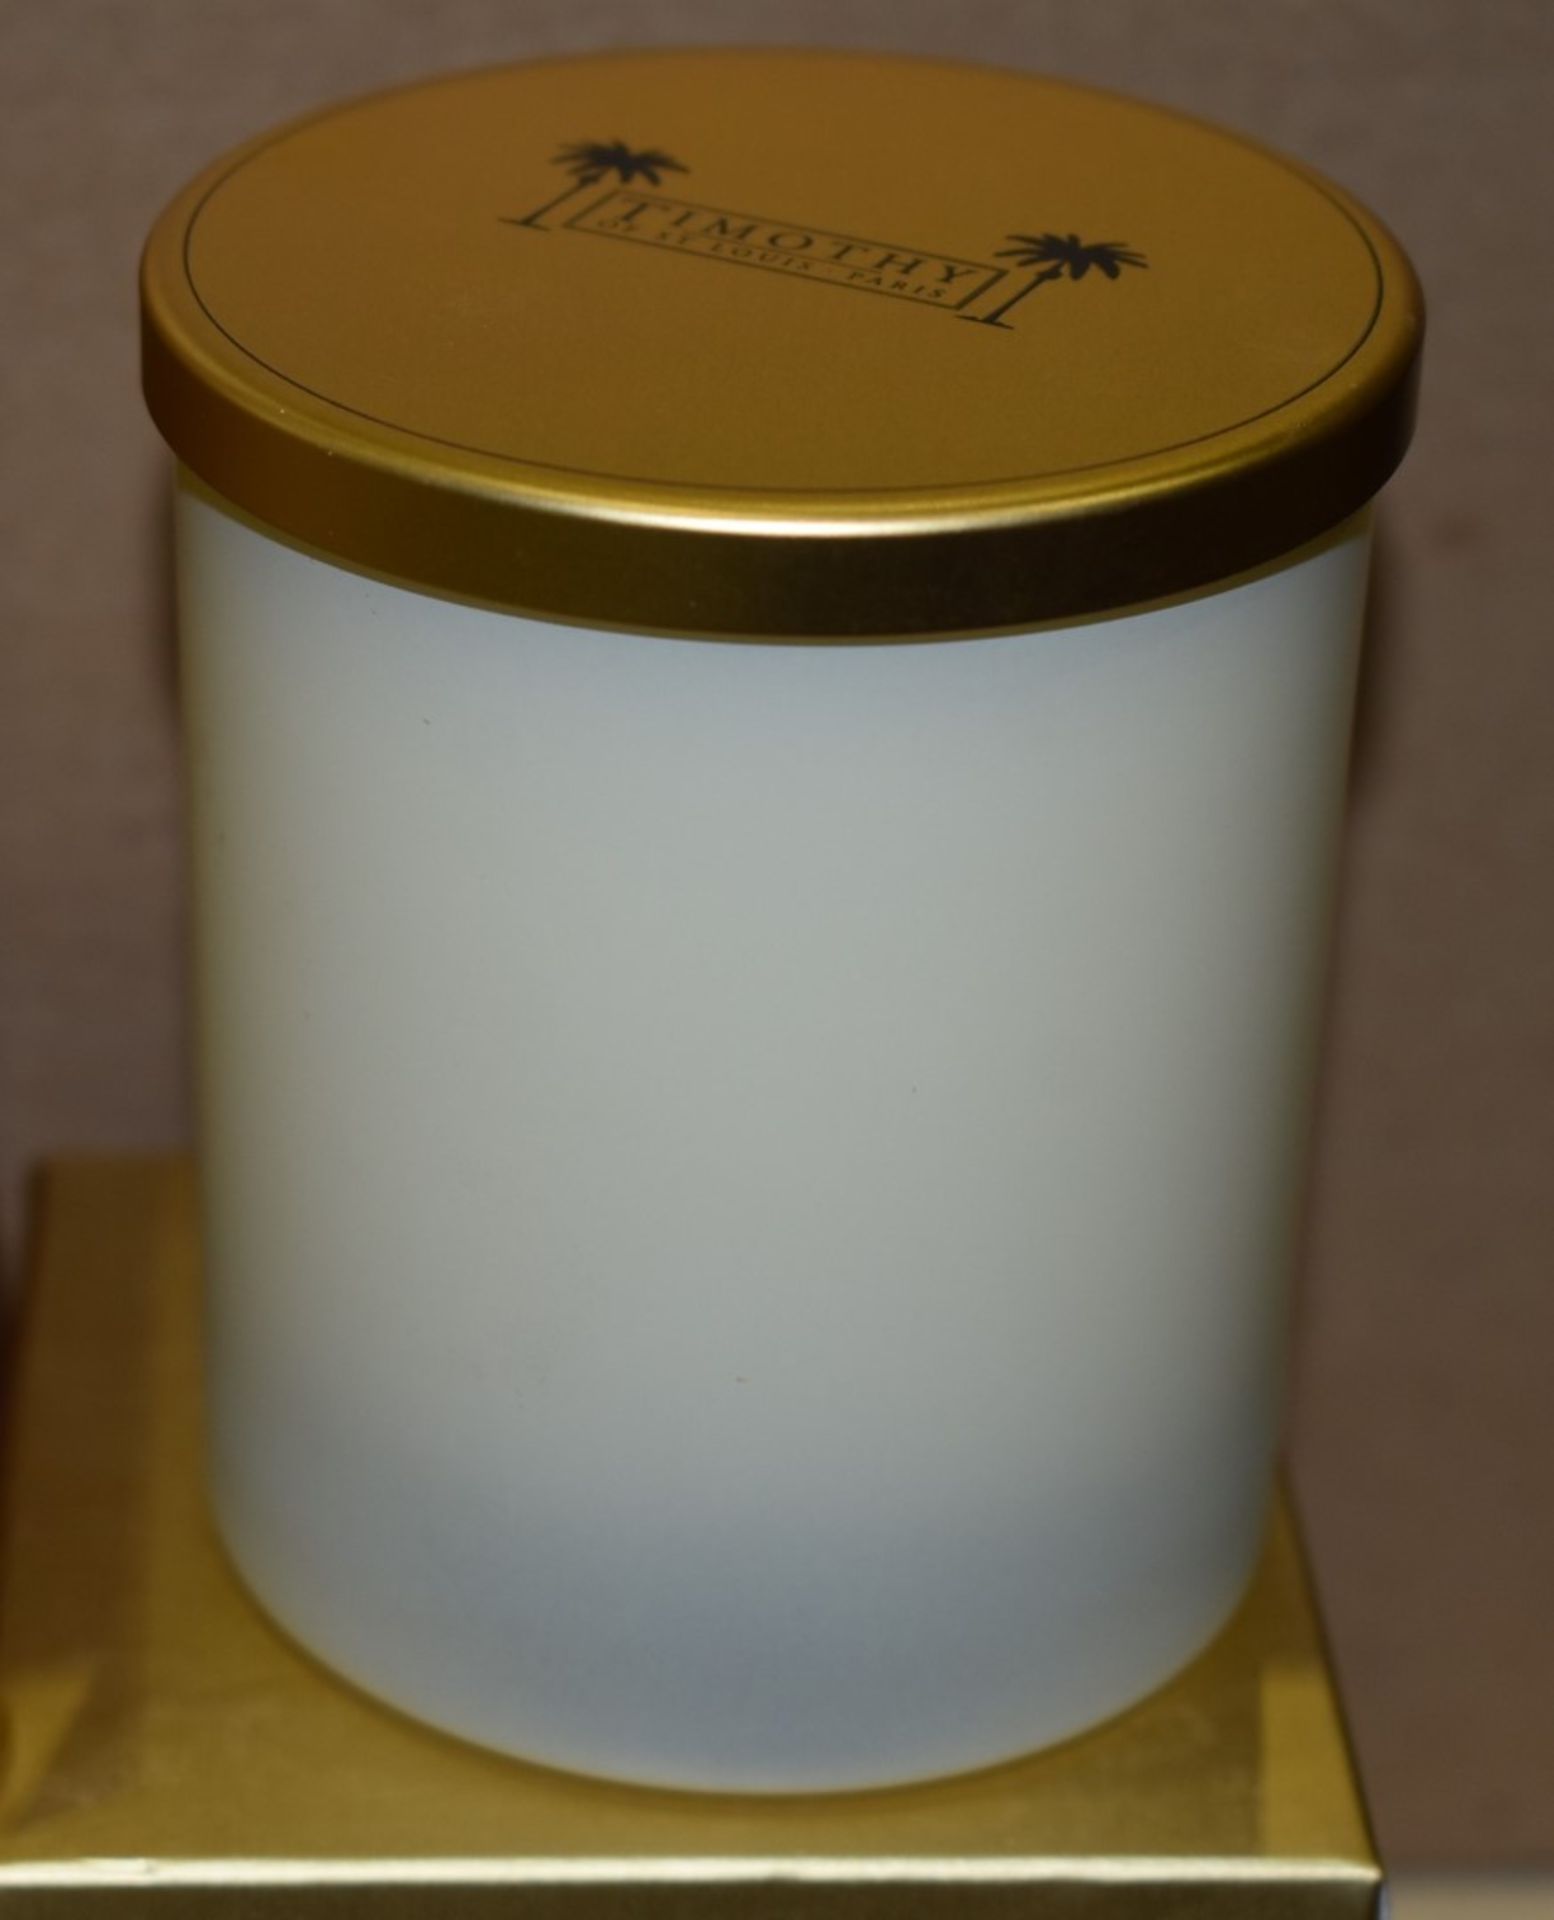 2 x Timothy of St Louis Perfumed Candle - The & Bois - Brand New and Boxed - 150g Scented Candles - Image 2 of 5